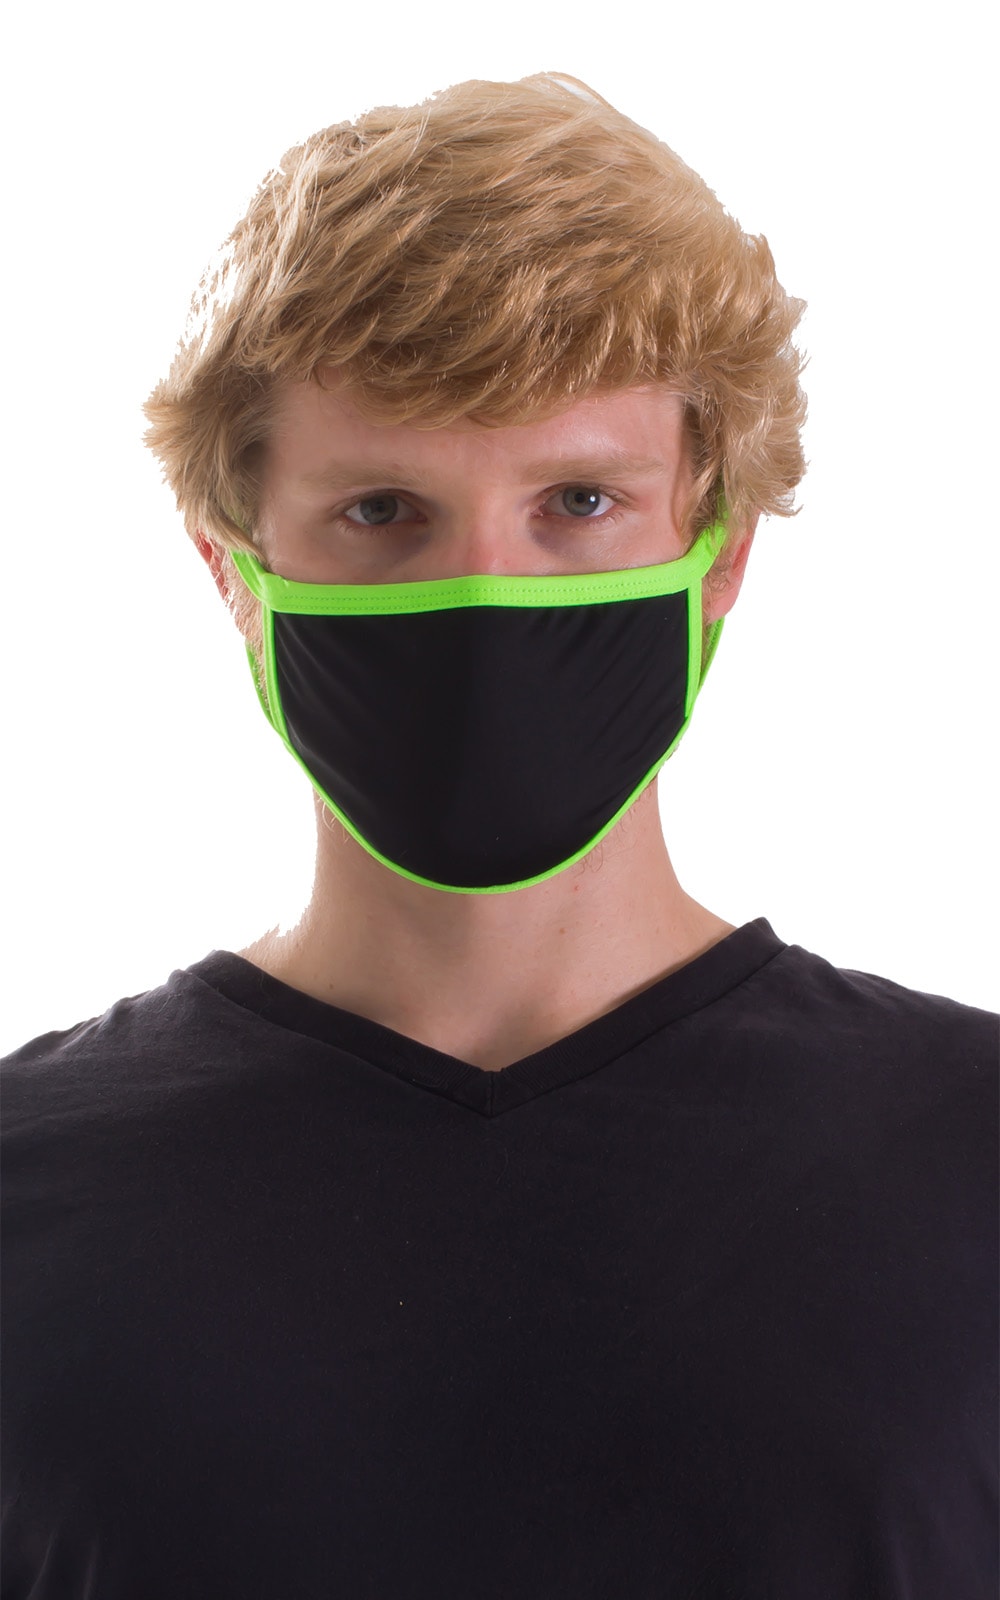 Blac-Lime 2-ply face mask 4